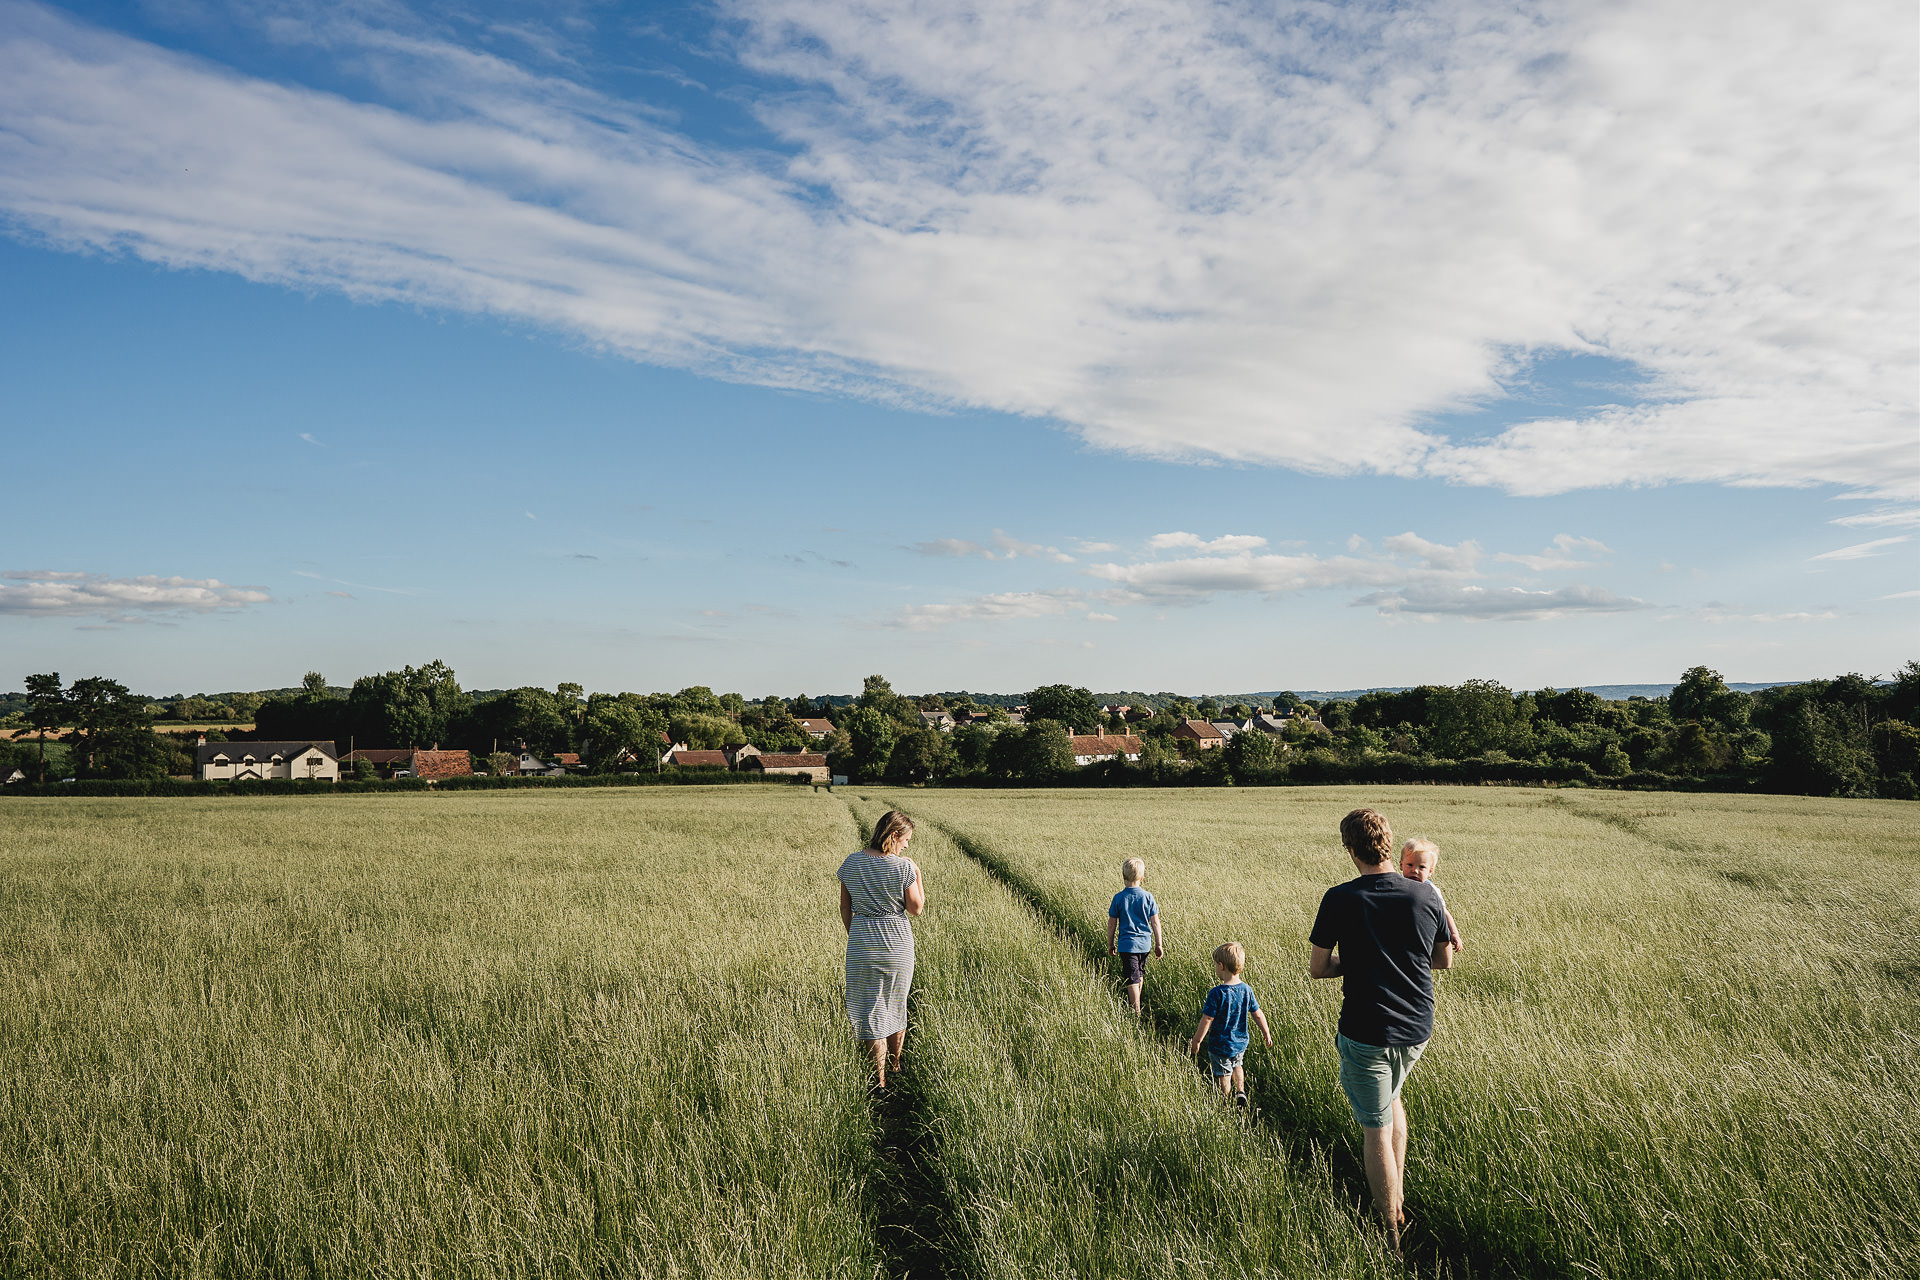 A family walking together through a field